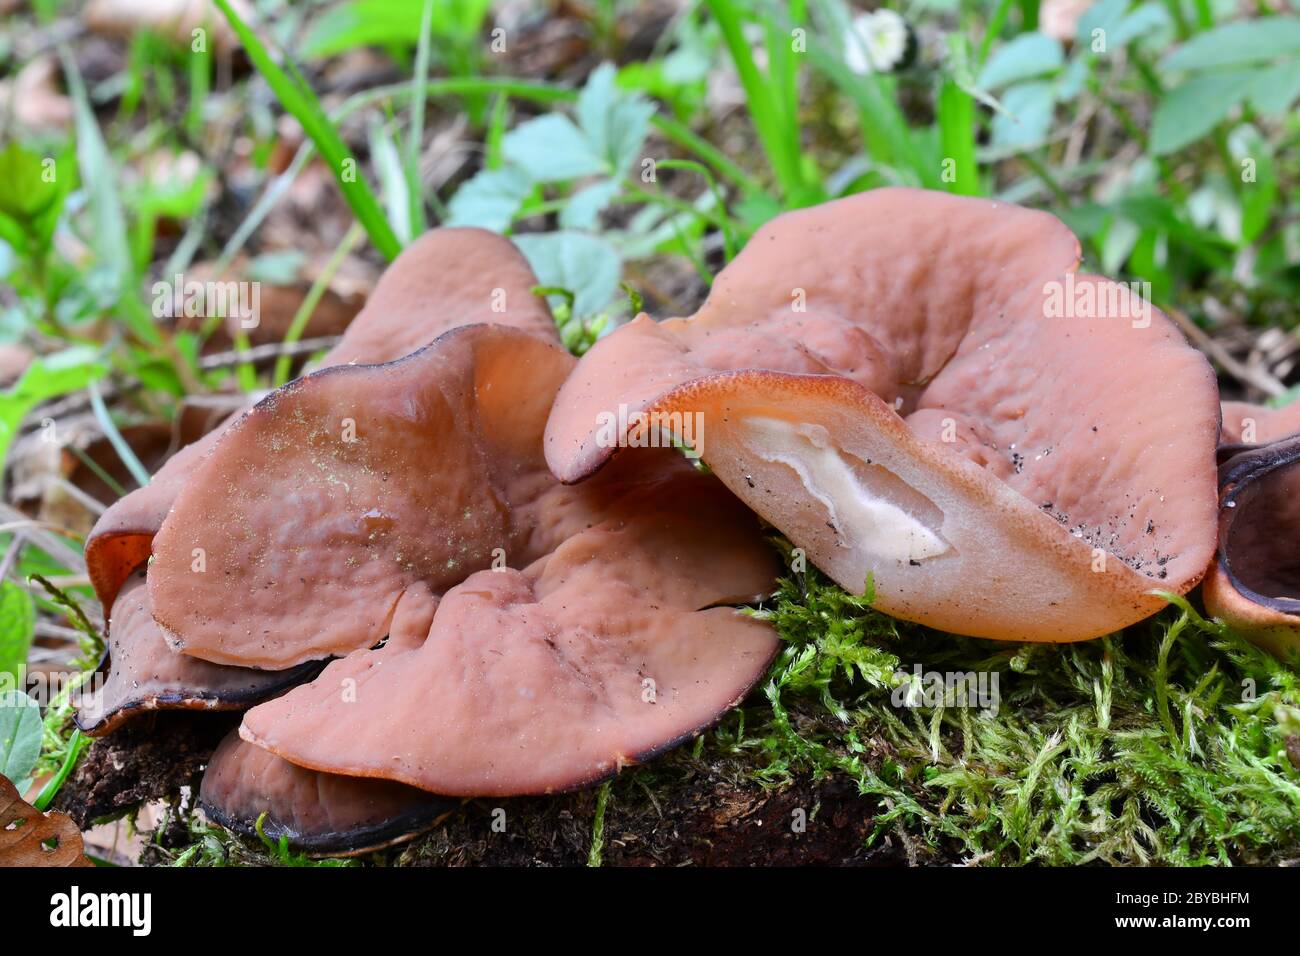 Disciotis venosa, commonly known as the bleach cup, veiny cup fungus, or the cup morel, considered edible spring mushroom in natural habitat, close up Stock Photo